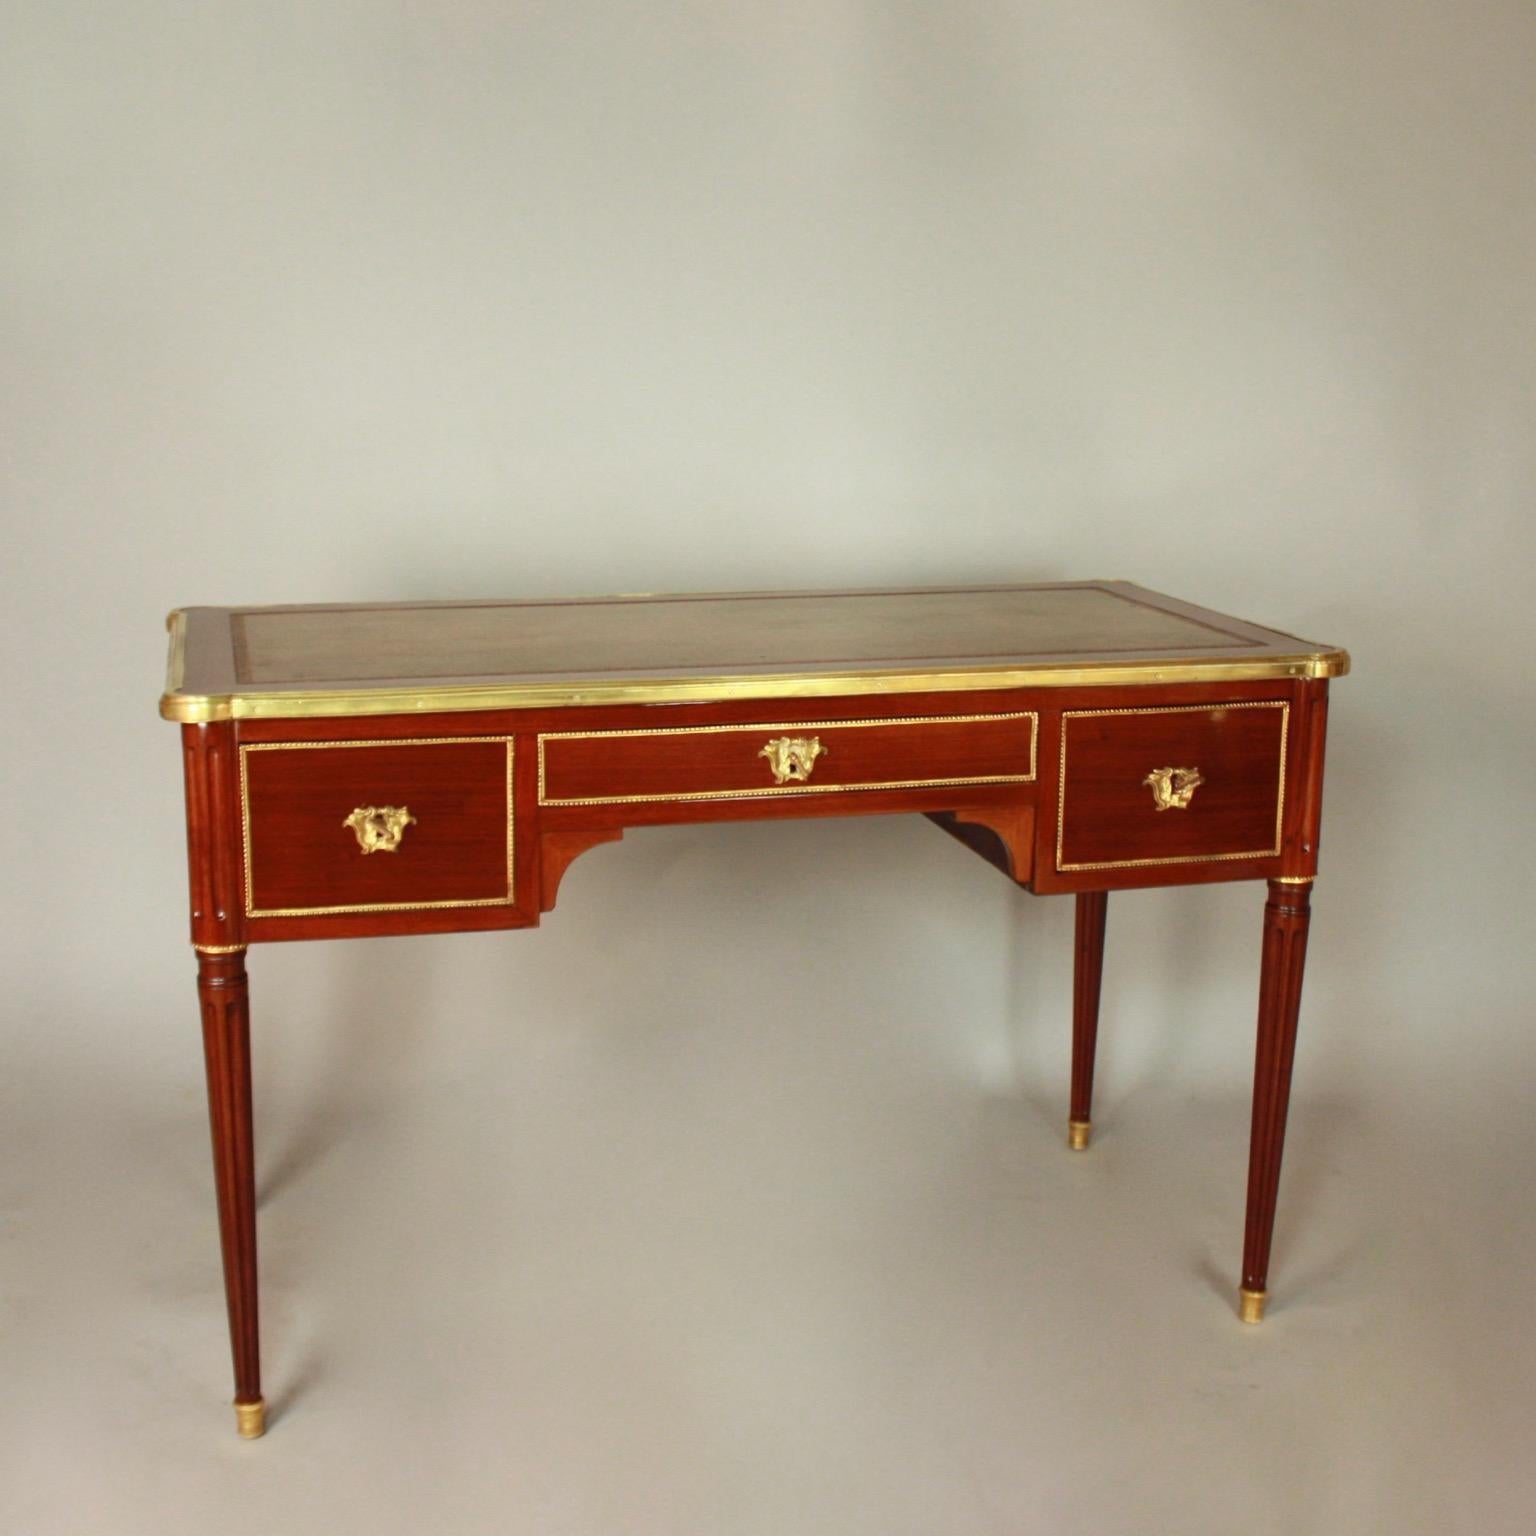 French 18th Century Louis XVI Mahogany Gilt Bronze Neoclassical Bureau Plat

A late 18th century Louis XVI mahogany bureau plat or writing desk. The rectangular brass banded top accentuated by projecting round fore corners. Set with a finely gold